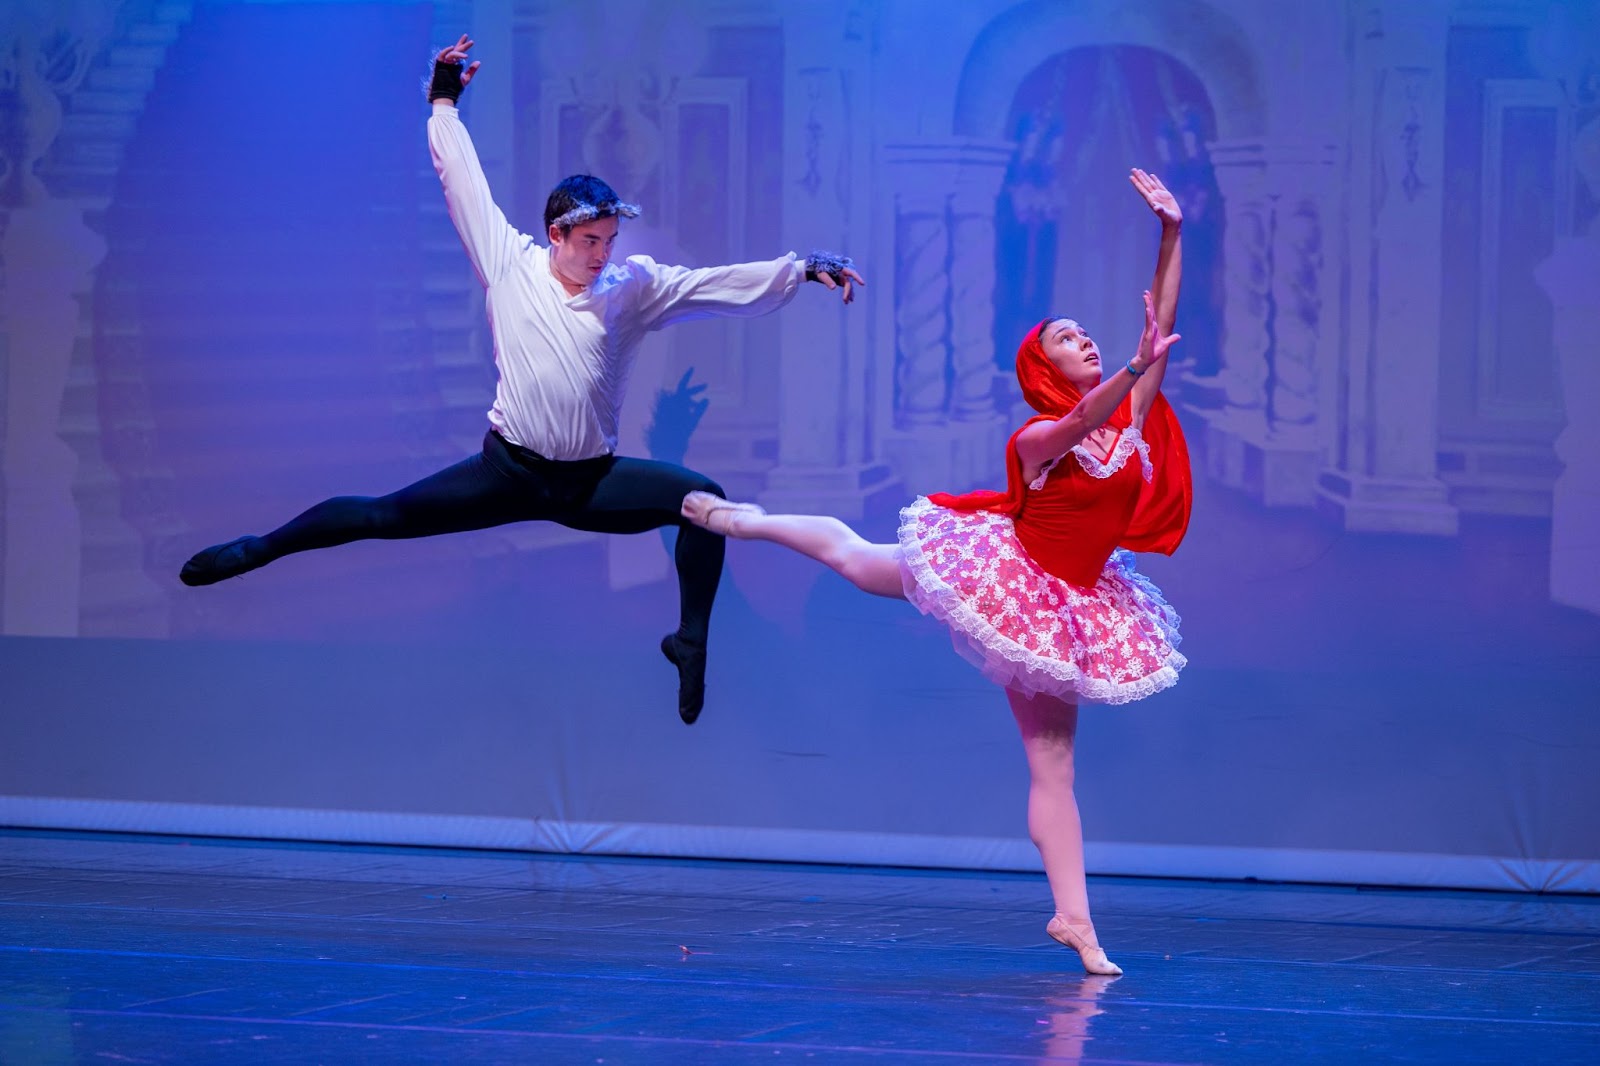 On stage, a male dancer hangs midair with his legs flexed. A female dancer poses beside him in a red shawl and tutu, holding her hands toward the sky.